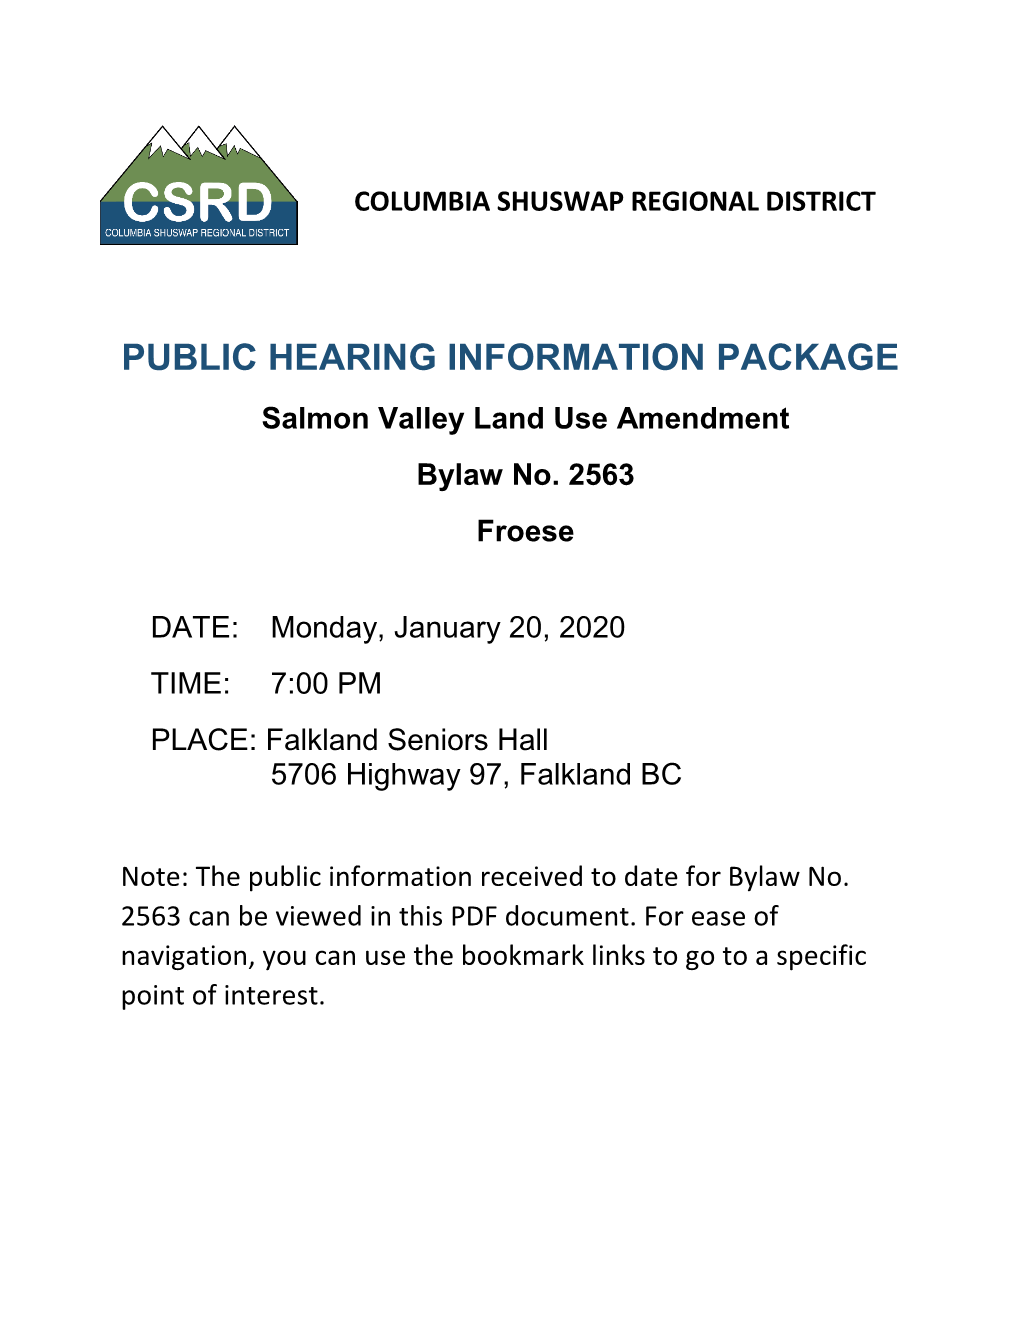 PUBLIC HEARING INFORMATION PACKAGE Salmon Valley Land Use Amendment Bylaw No